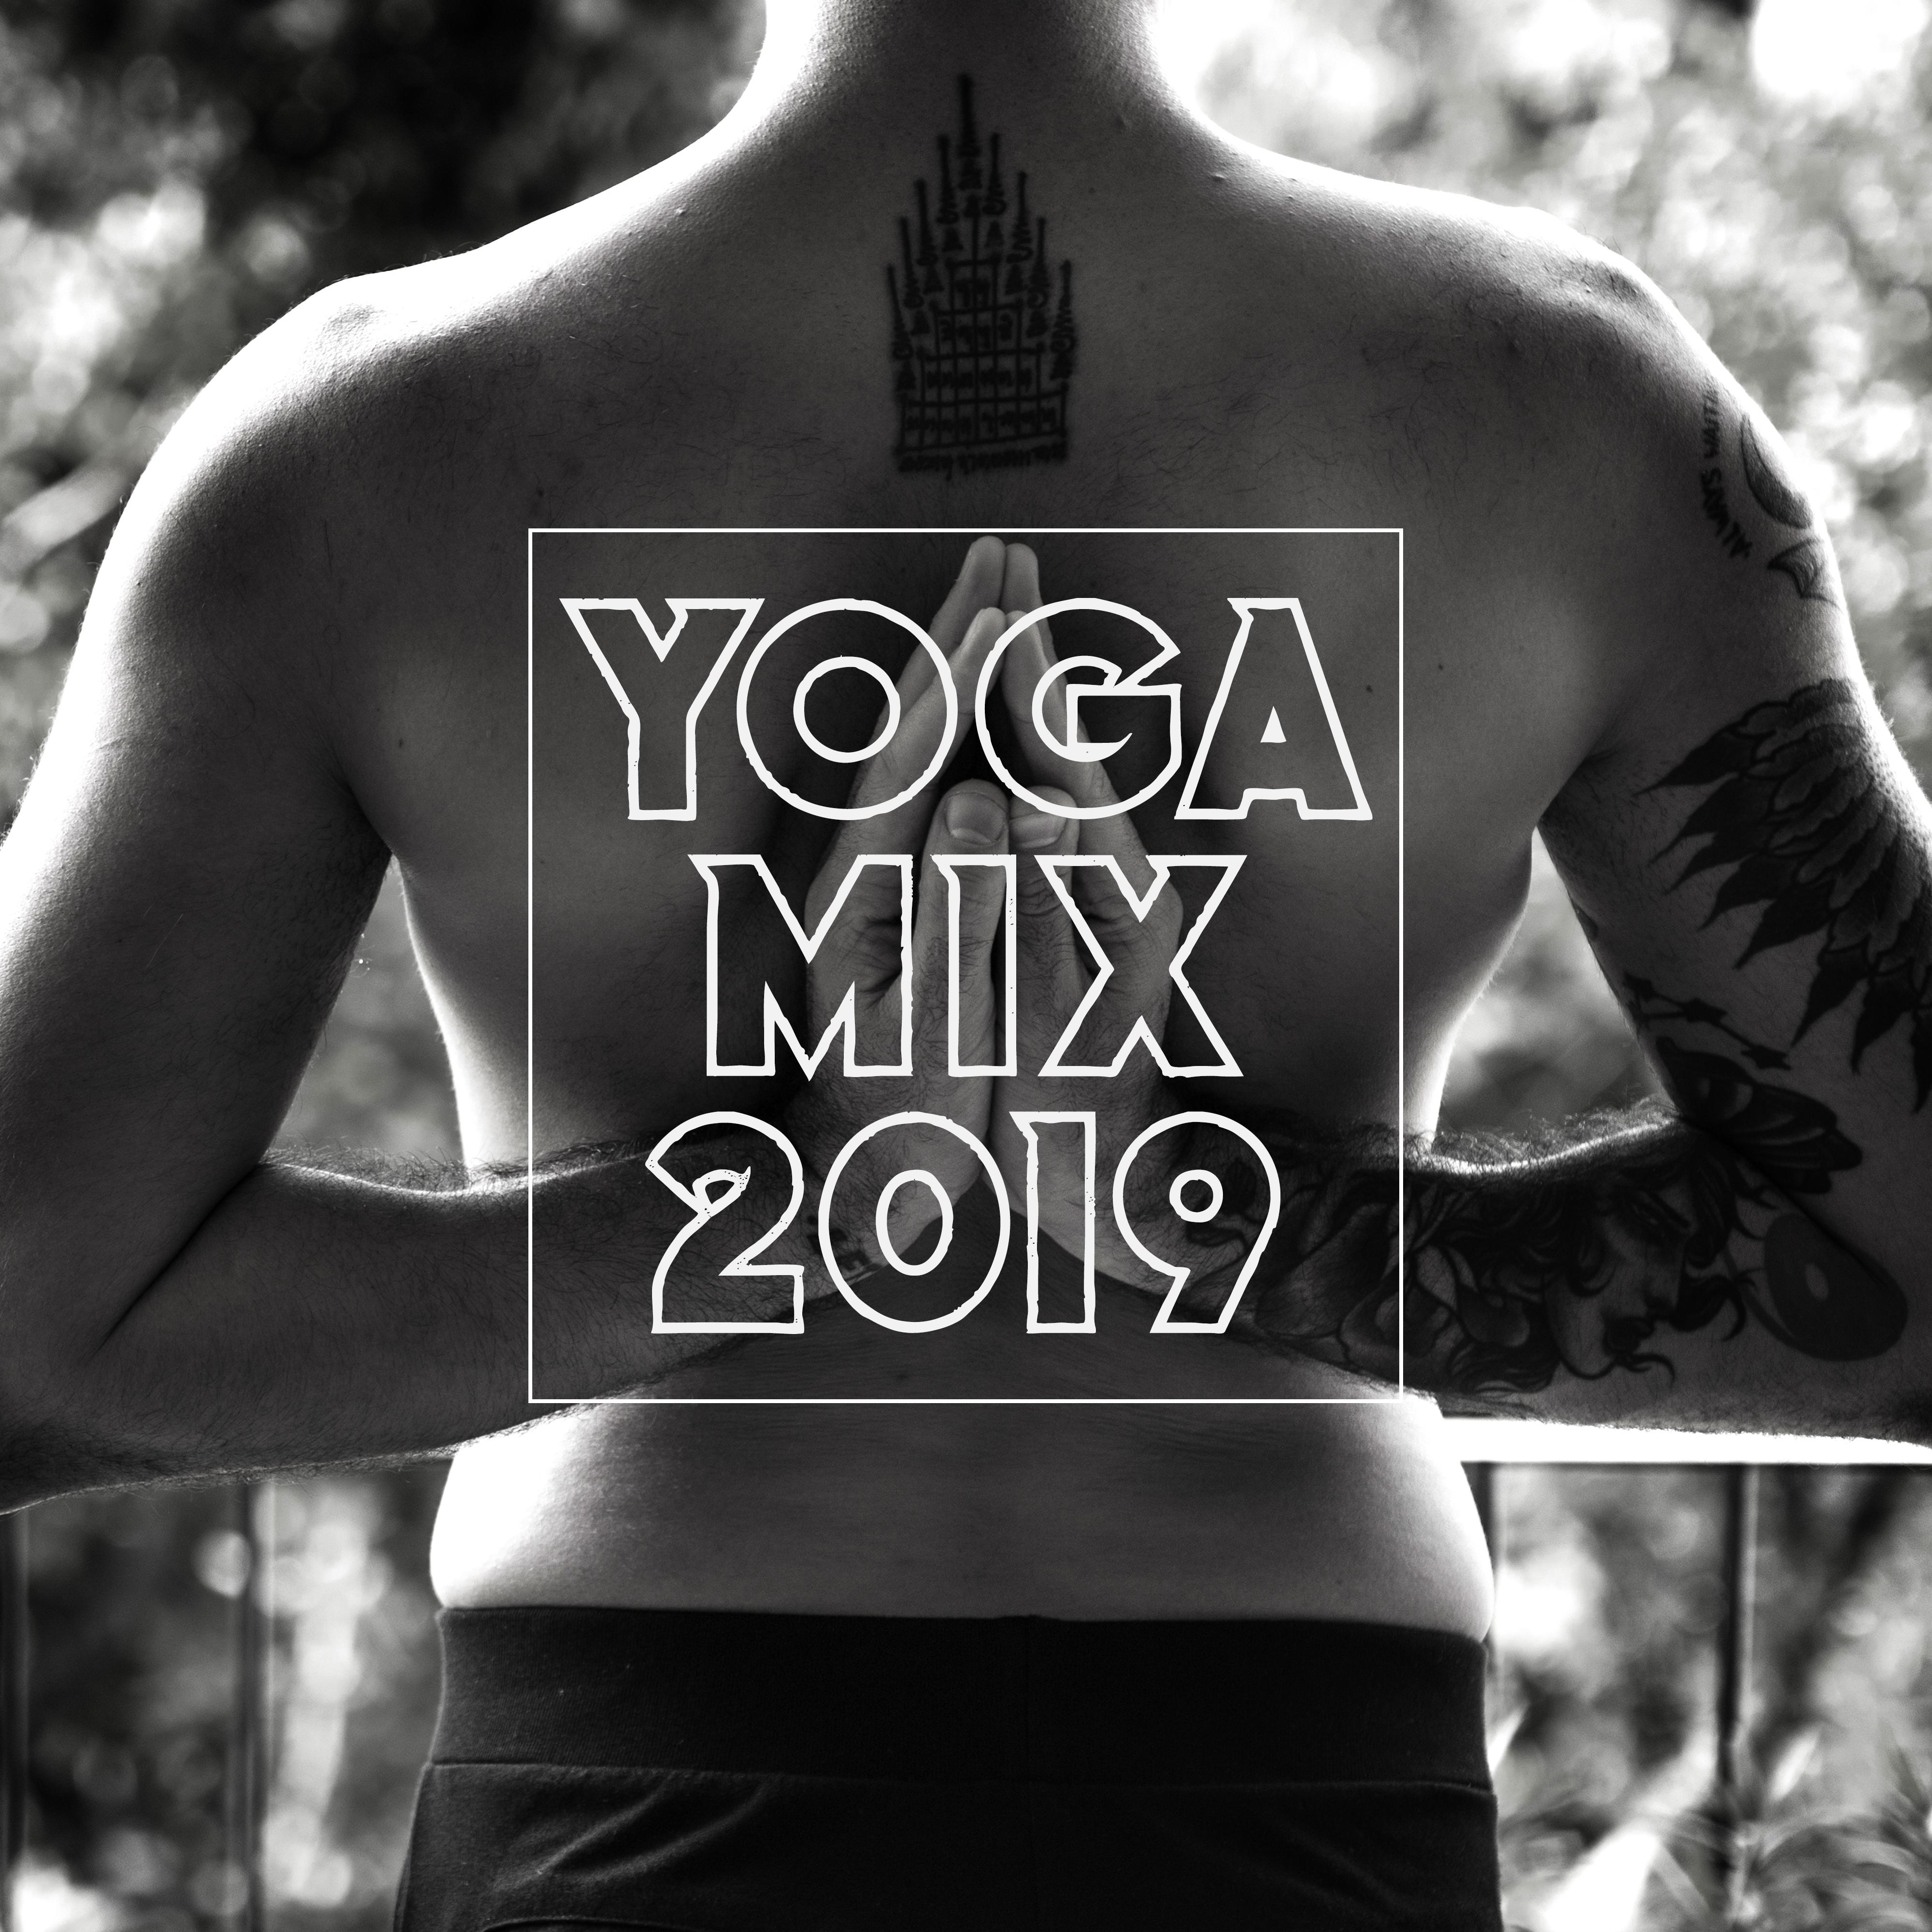 Yoga Mix 2019 – Meditation Music Zone, Relaxing Music Therapy, Inner Harmony, Music for Mind, Pure Relaxation, Zen Lounge